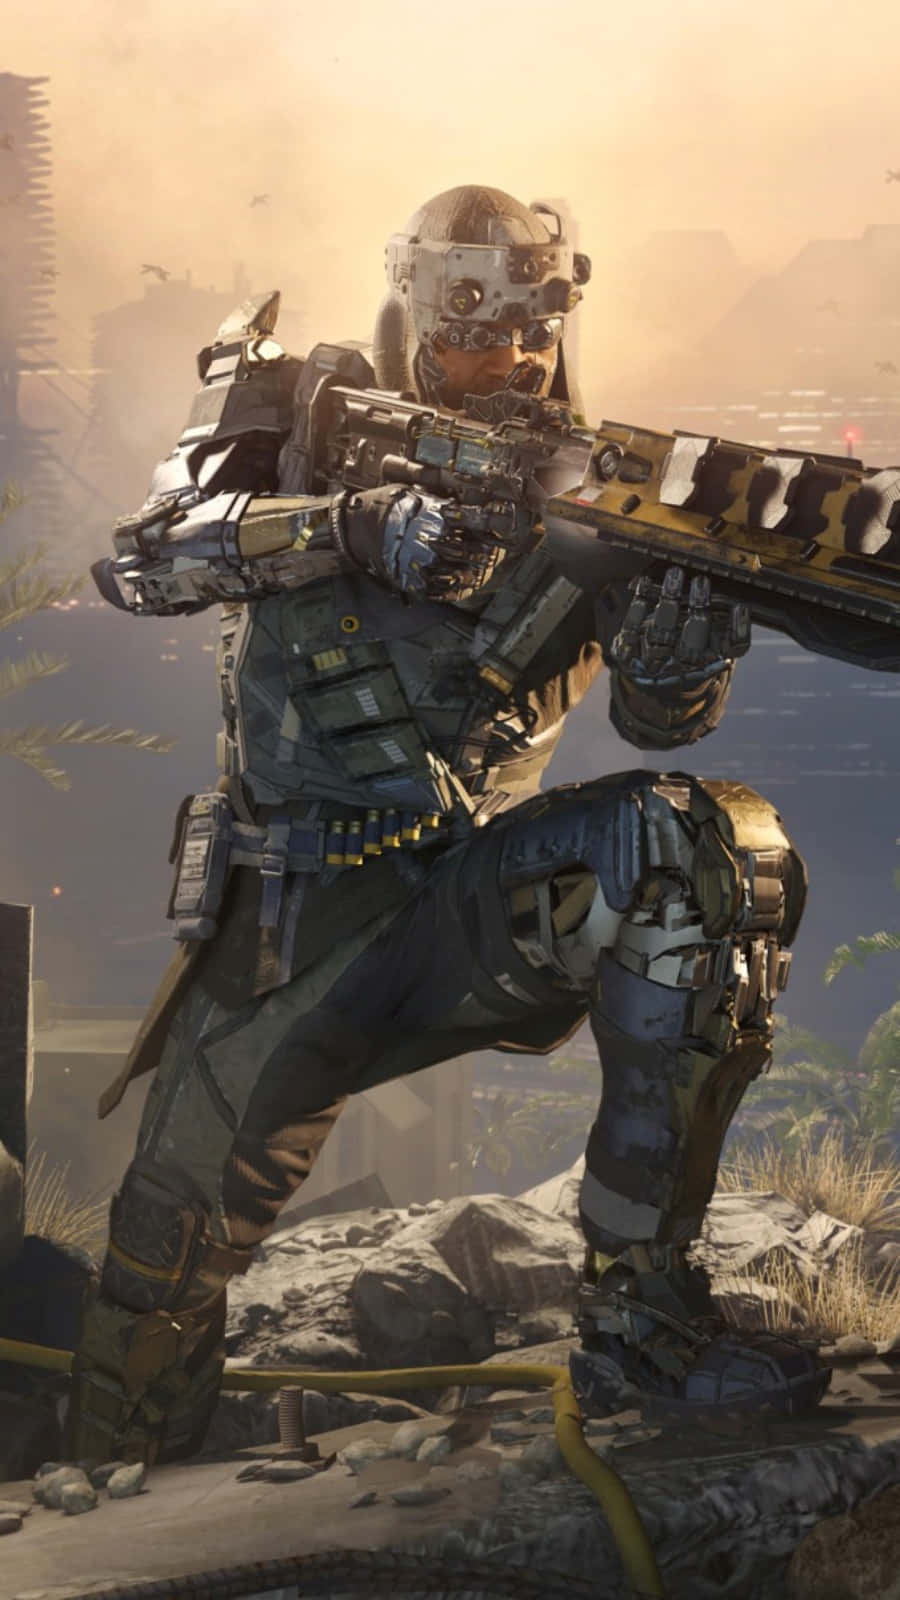 Enjoy Call of Duty Black Ops' great graphics on your iPhone Wallpaper